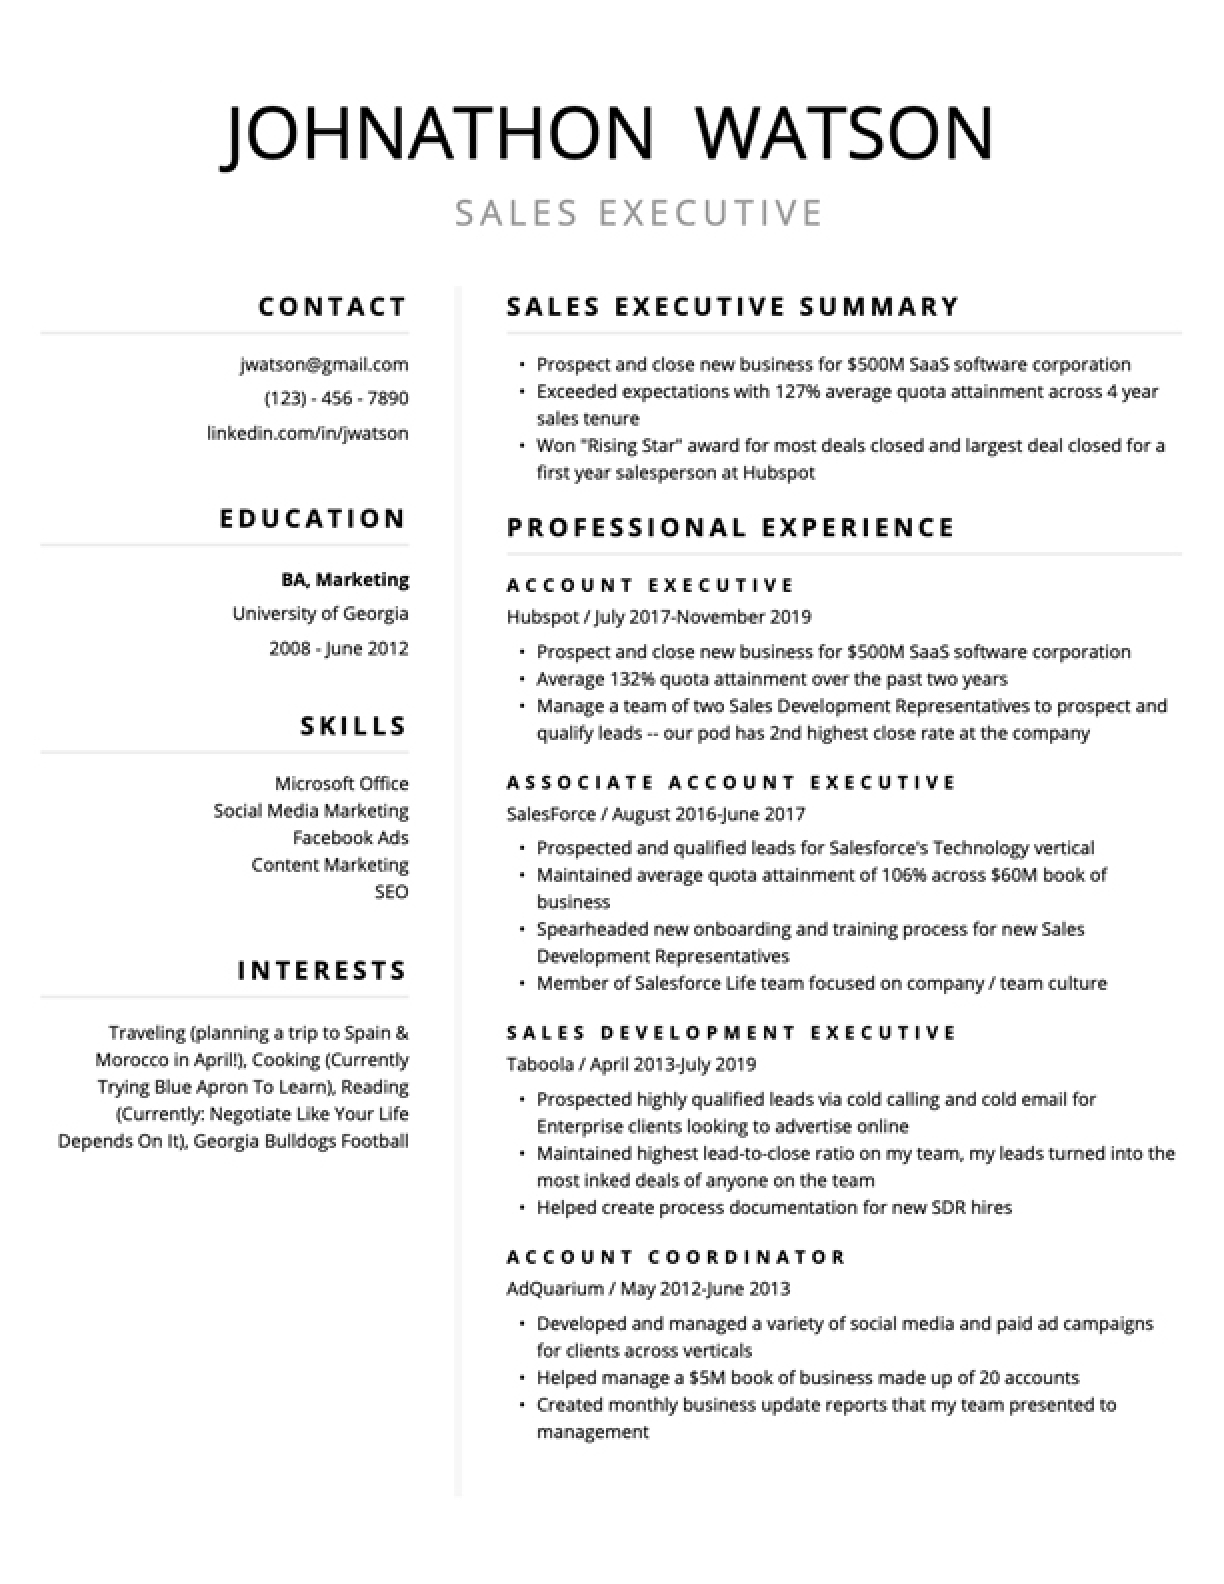 Finding Customers With resume Part B